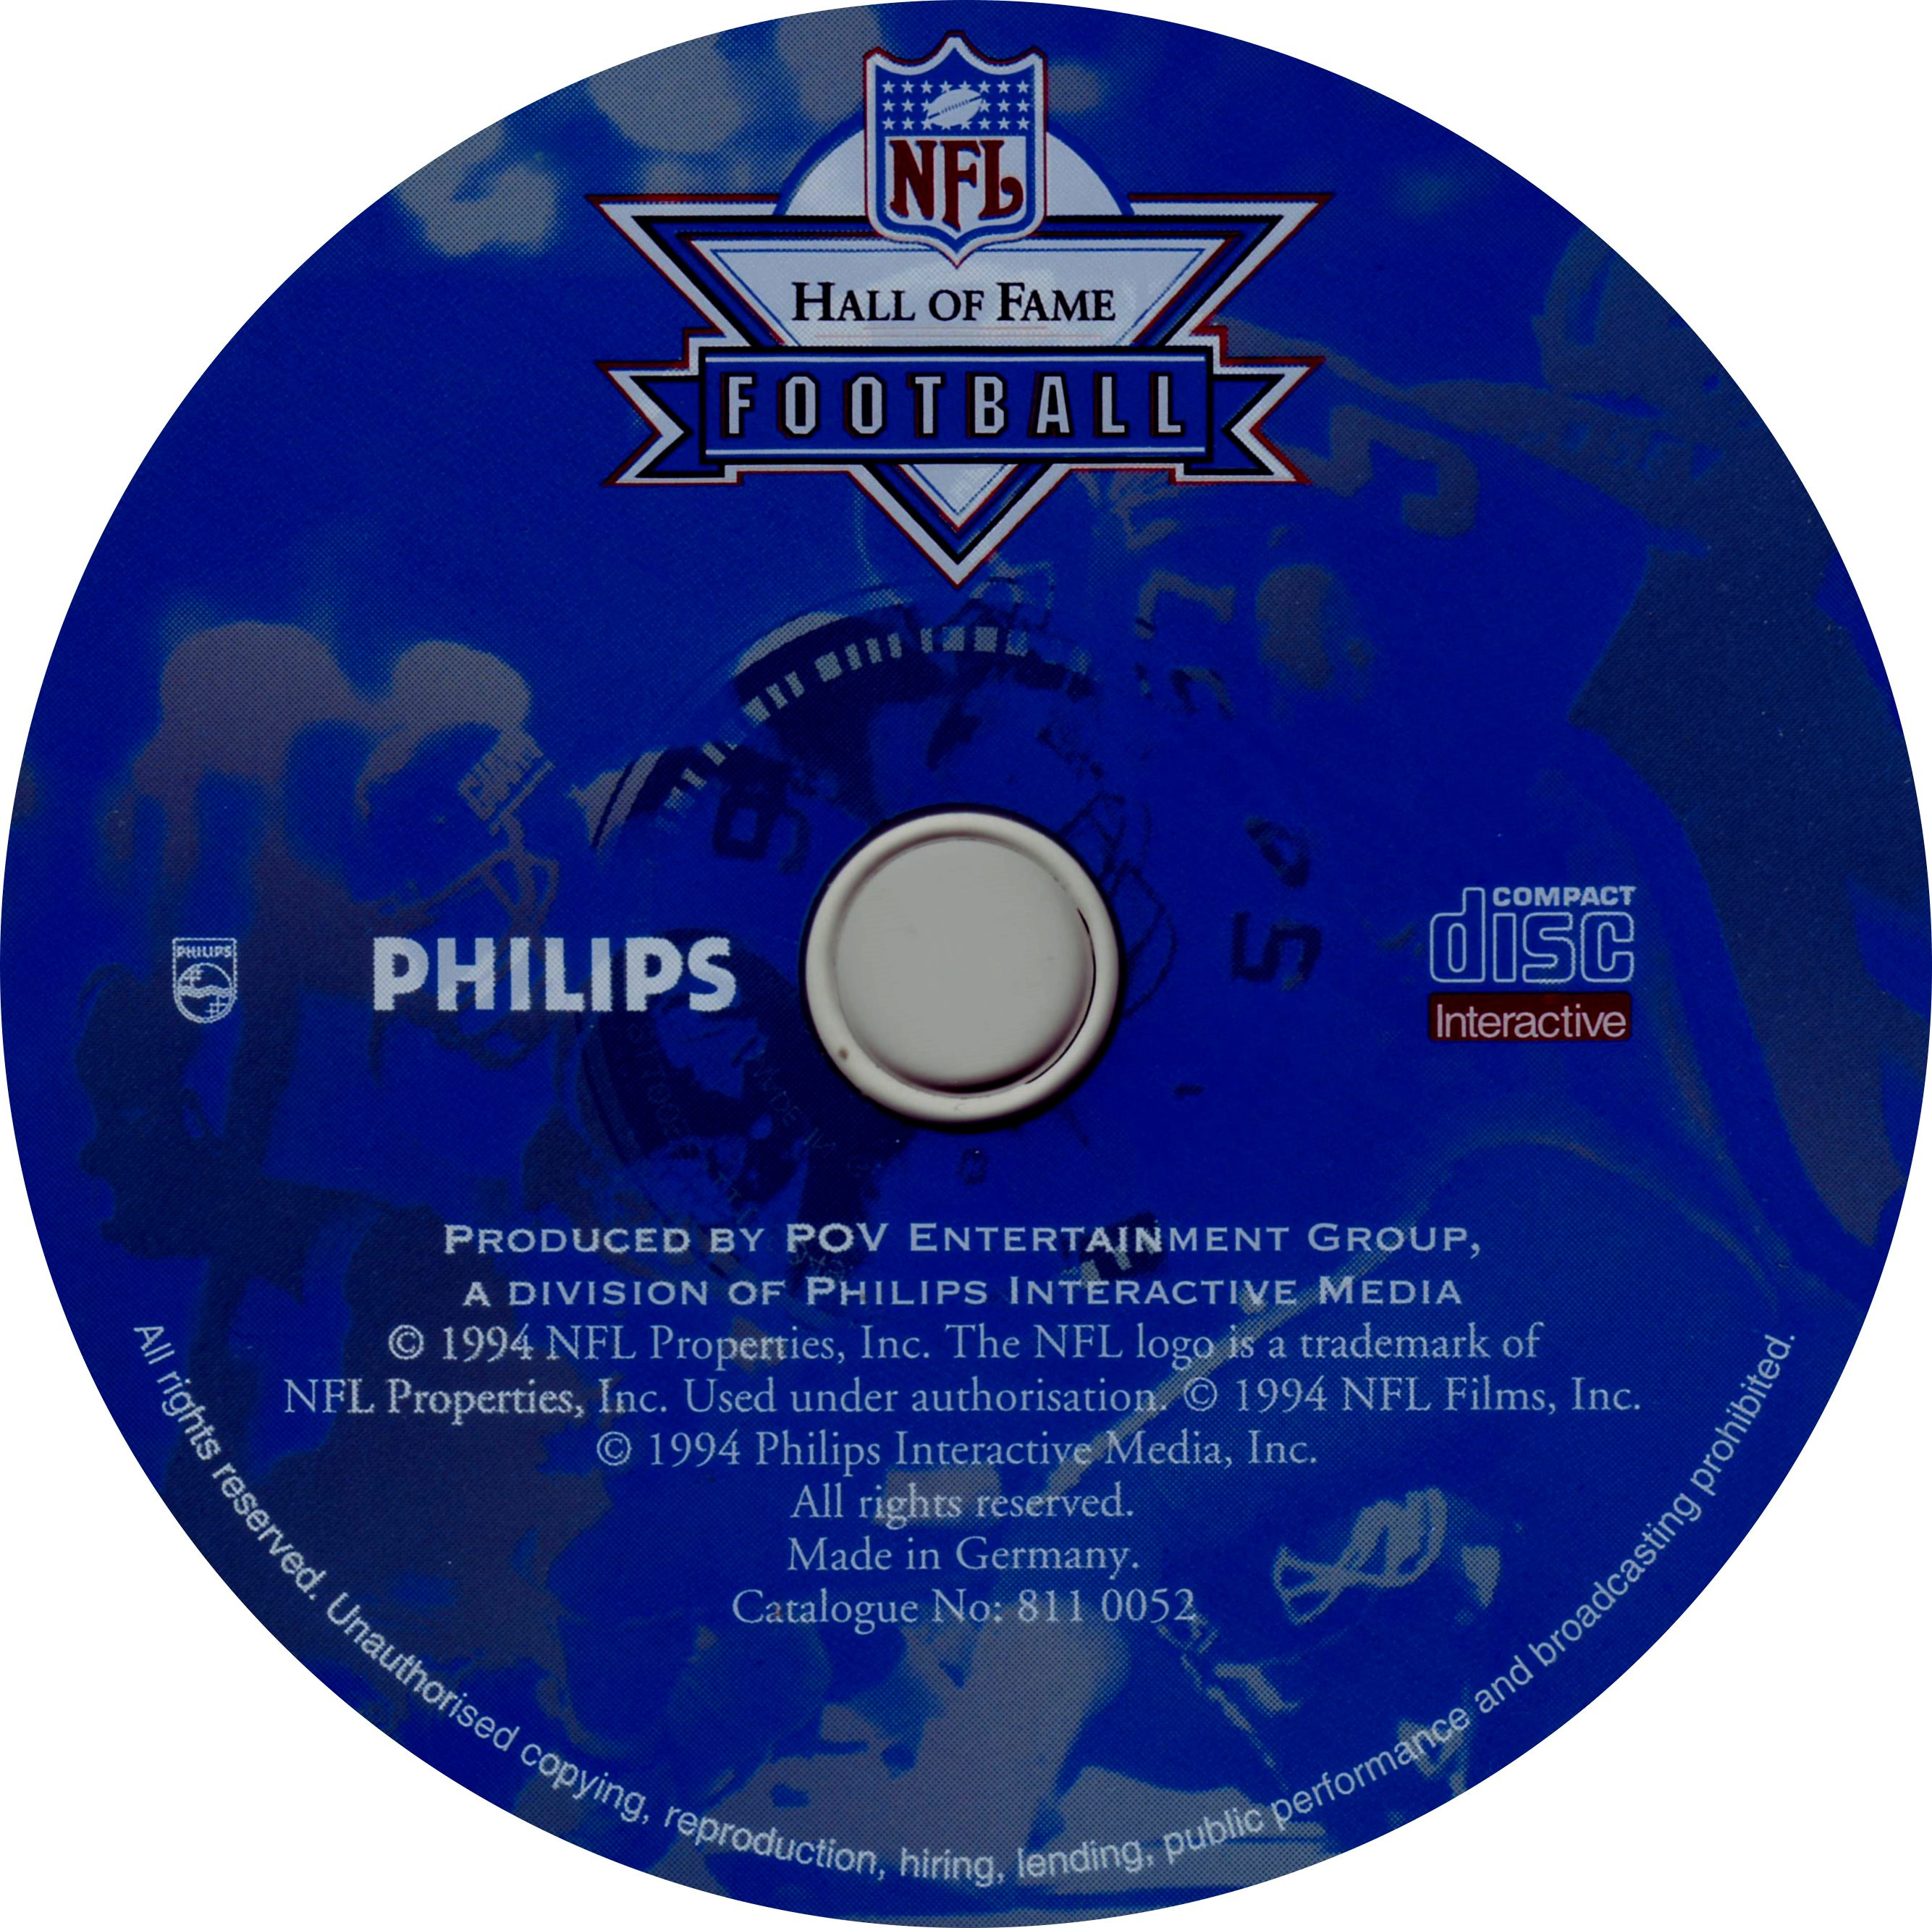 NFL Hall Of Fame Football CD The world of CDi